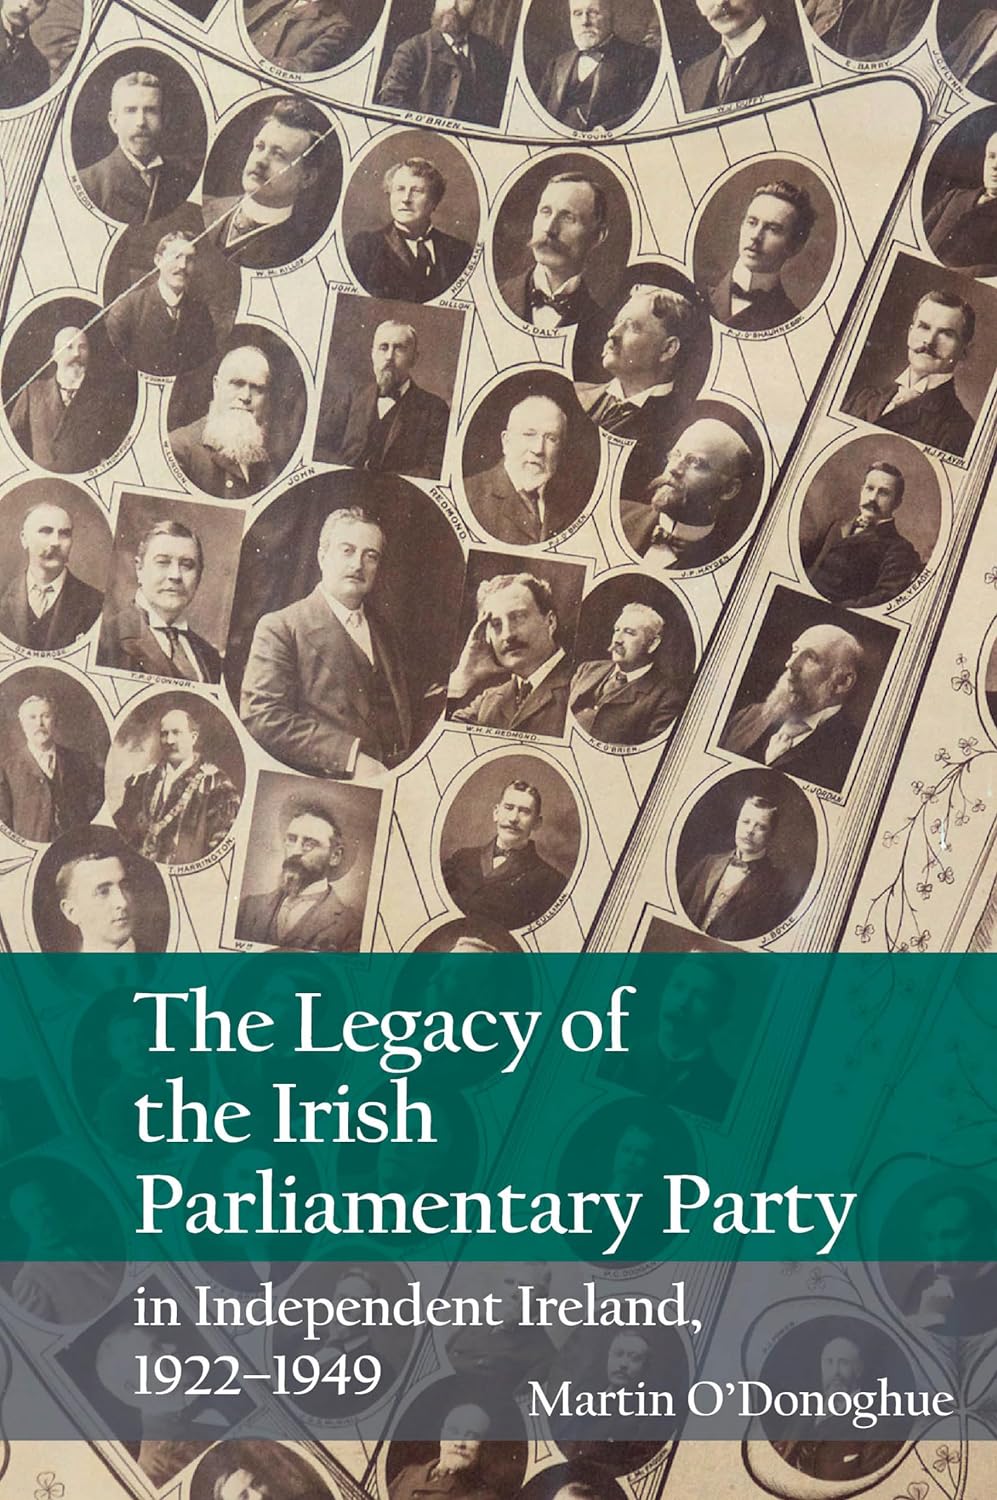 The Legacy of the Irish Parliamentary Party in Independent Ireland, 1922-1949, by Martin O’Donoghue